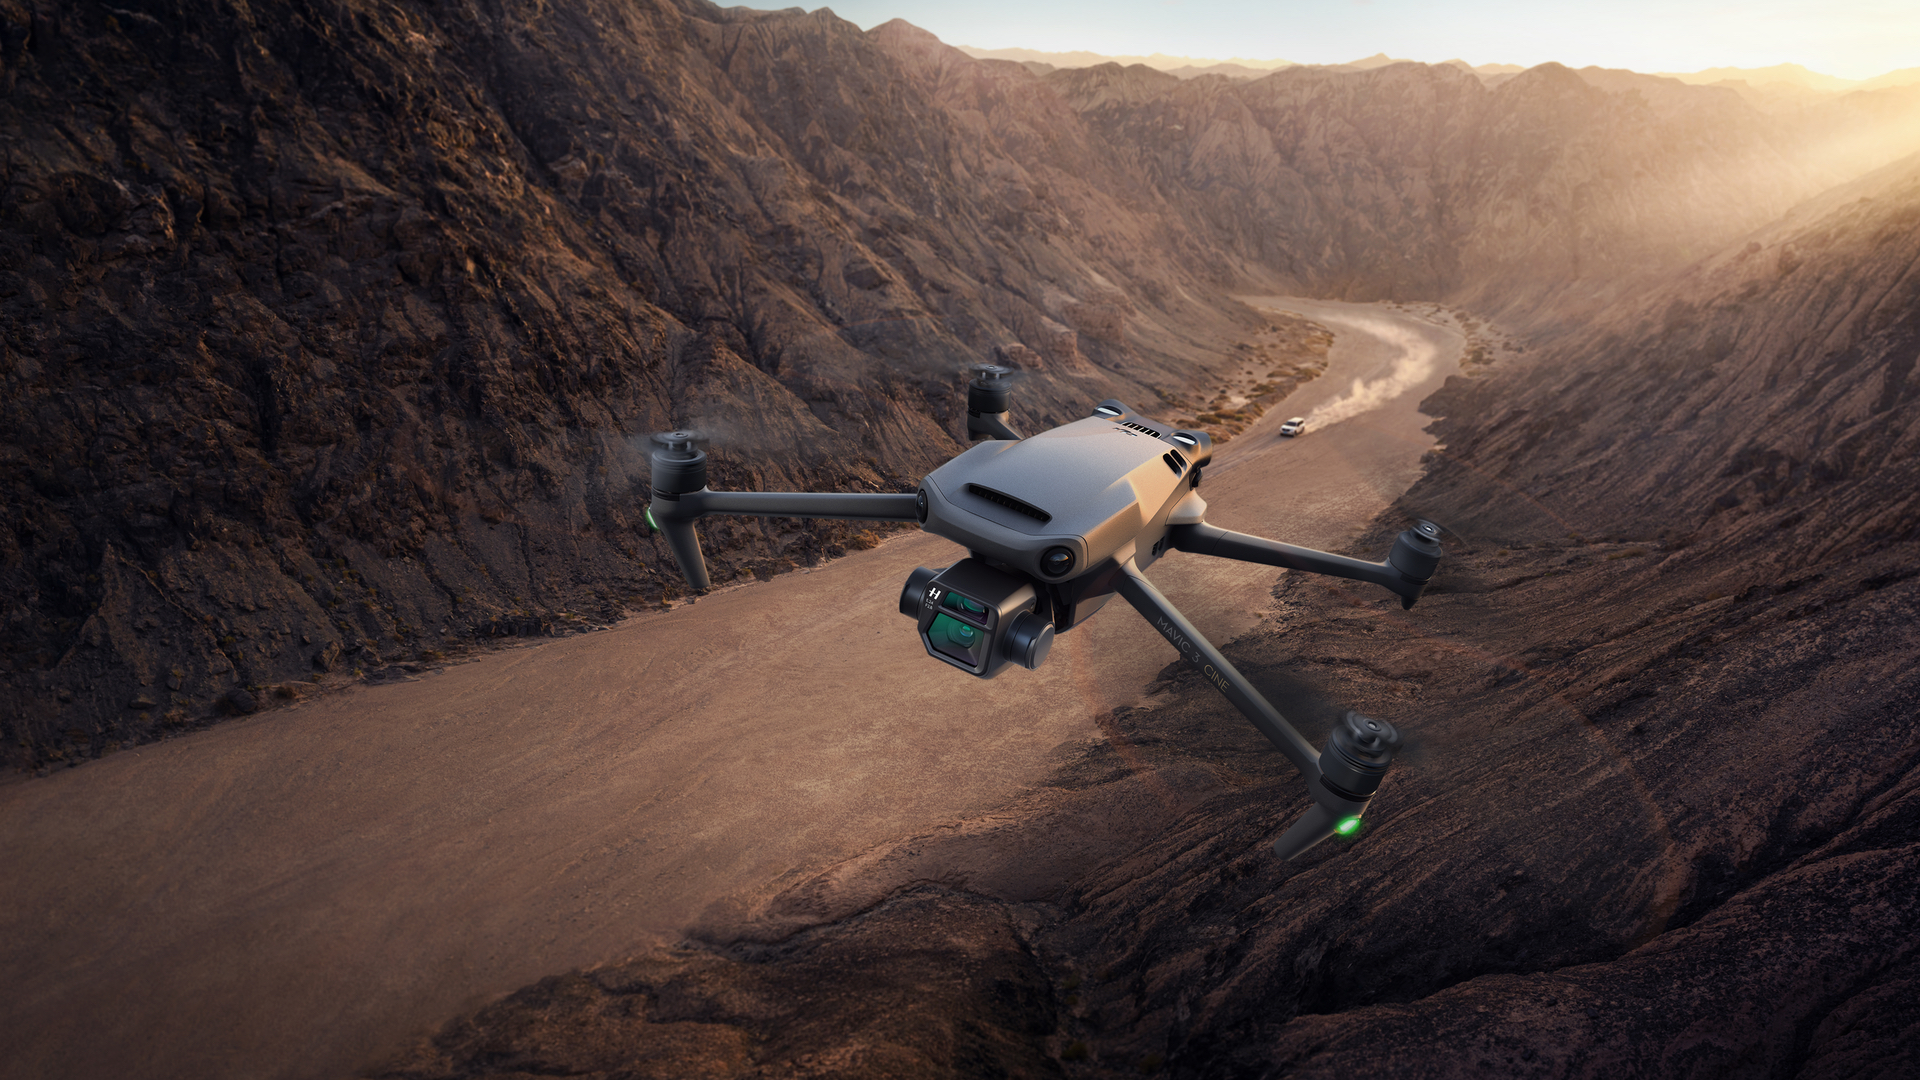 DJI Mini 3 Pro brings high-end features to a compact drone - Amateur  Photographer